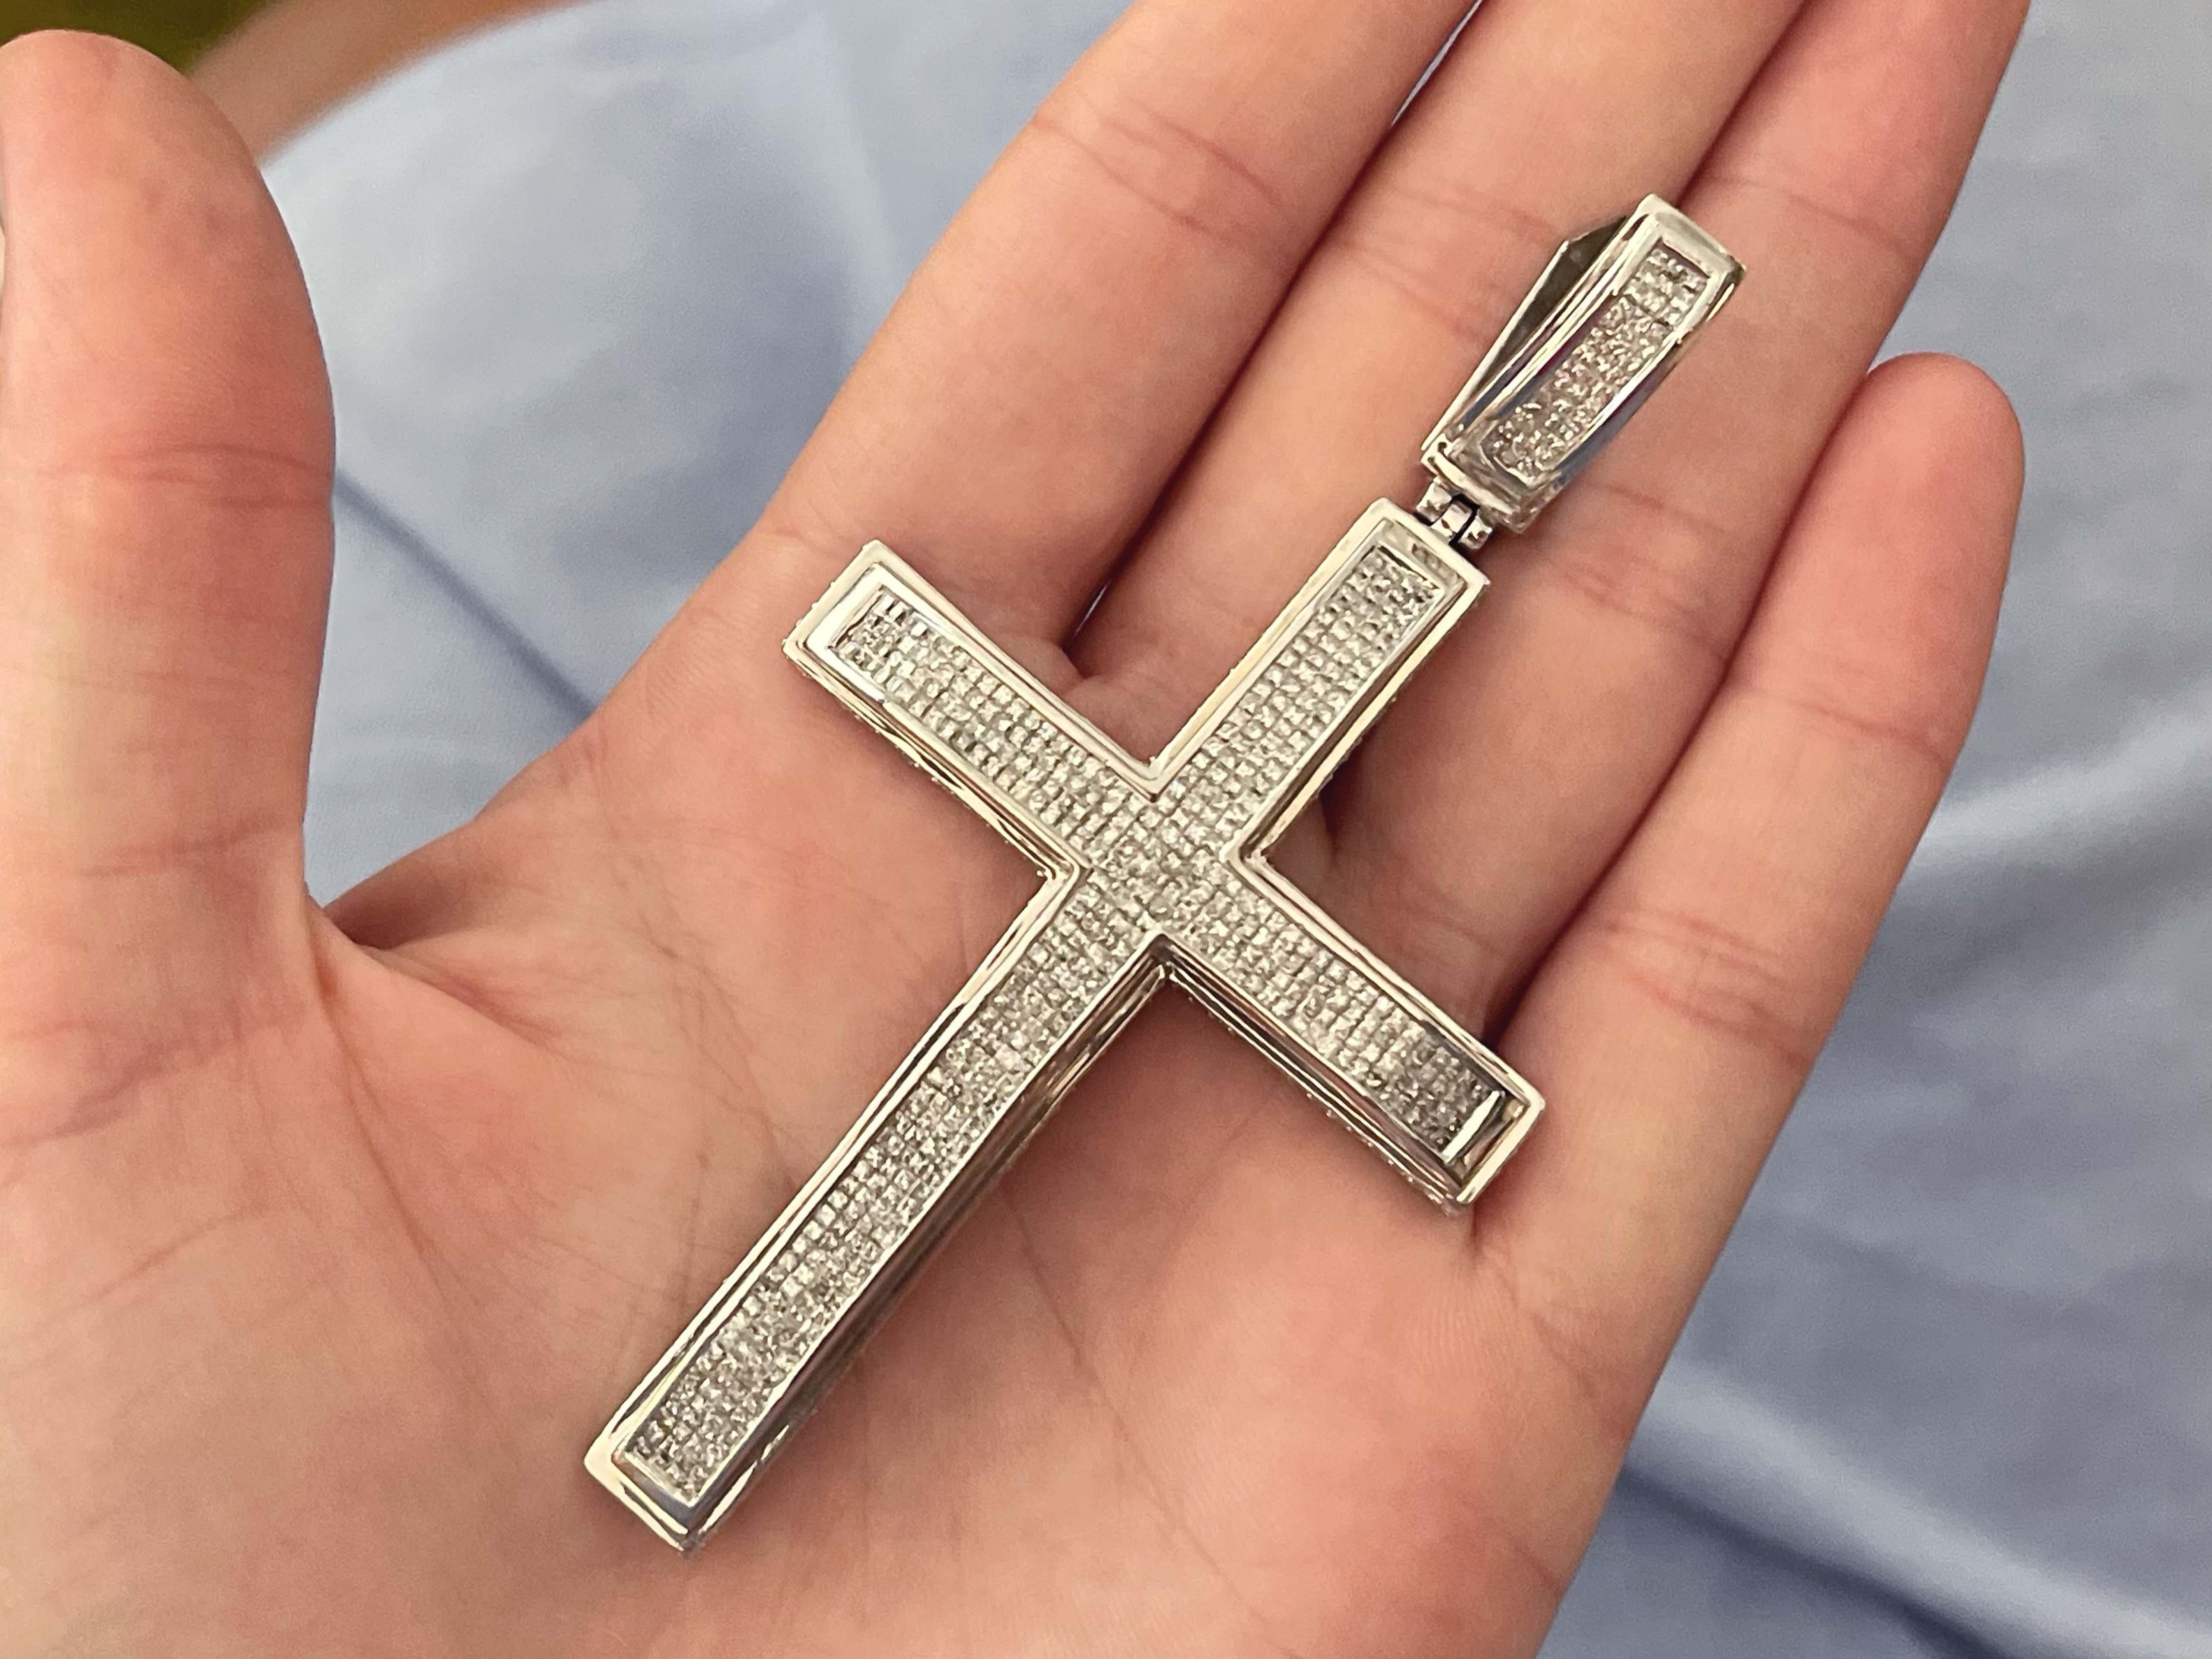 Item Specifications:

Metal: 14K White Gold

Total Weight: 33.3 Grams

Cross and Bail diameter: 3.60